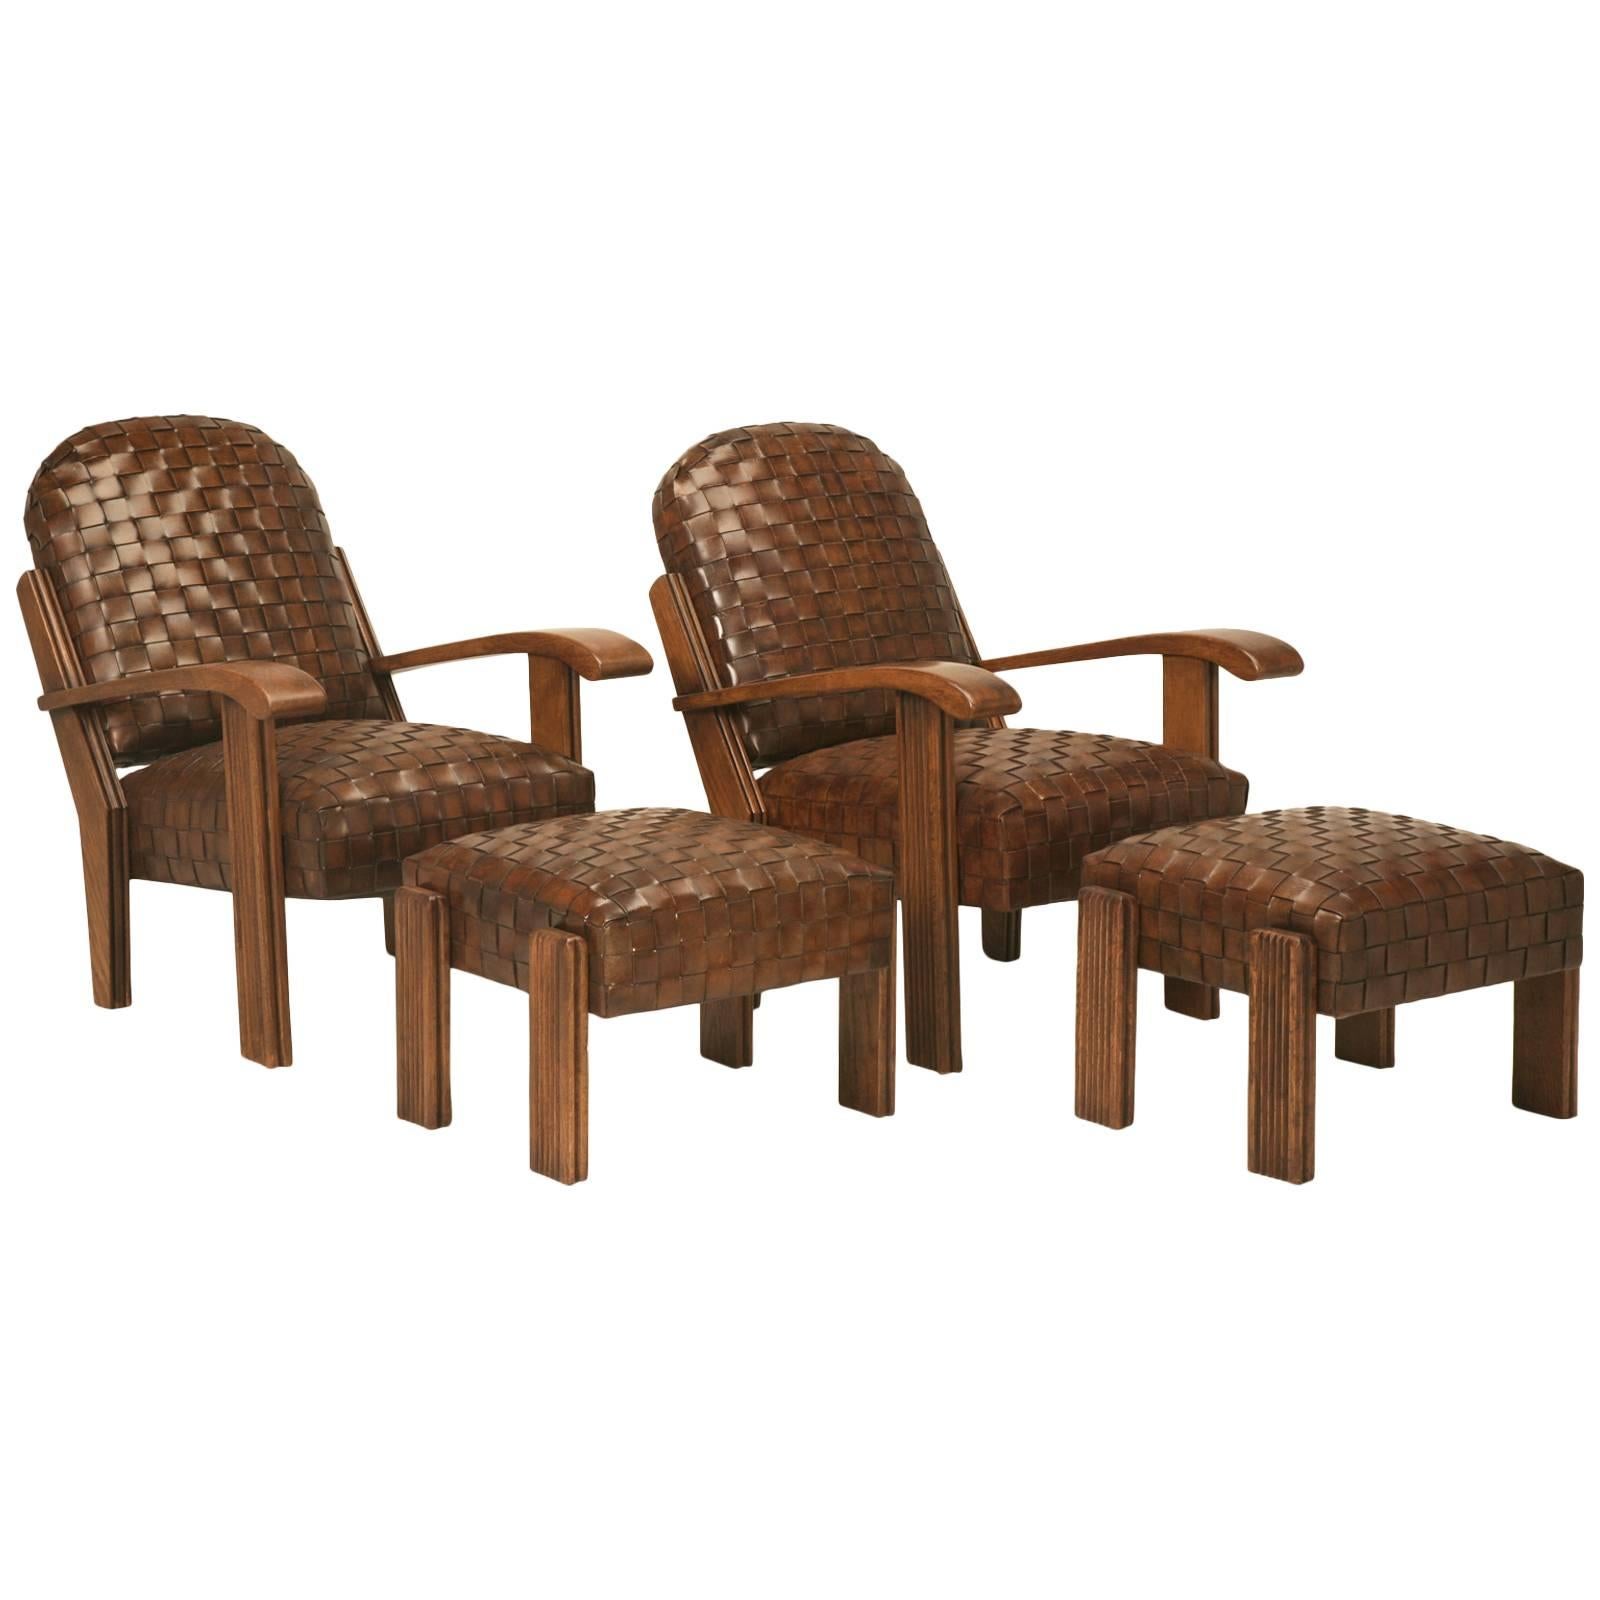  French Woven Leather Club Chairs with Matching Ottomans Available in any Color For Sale